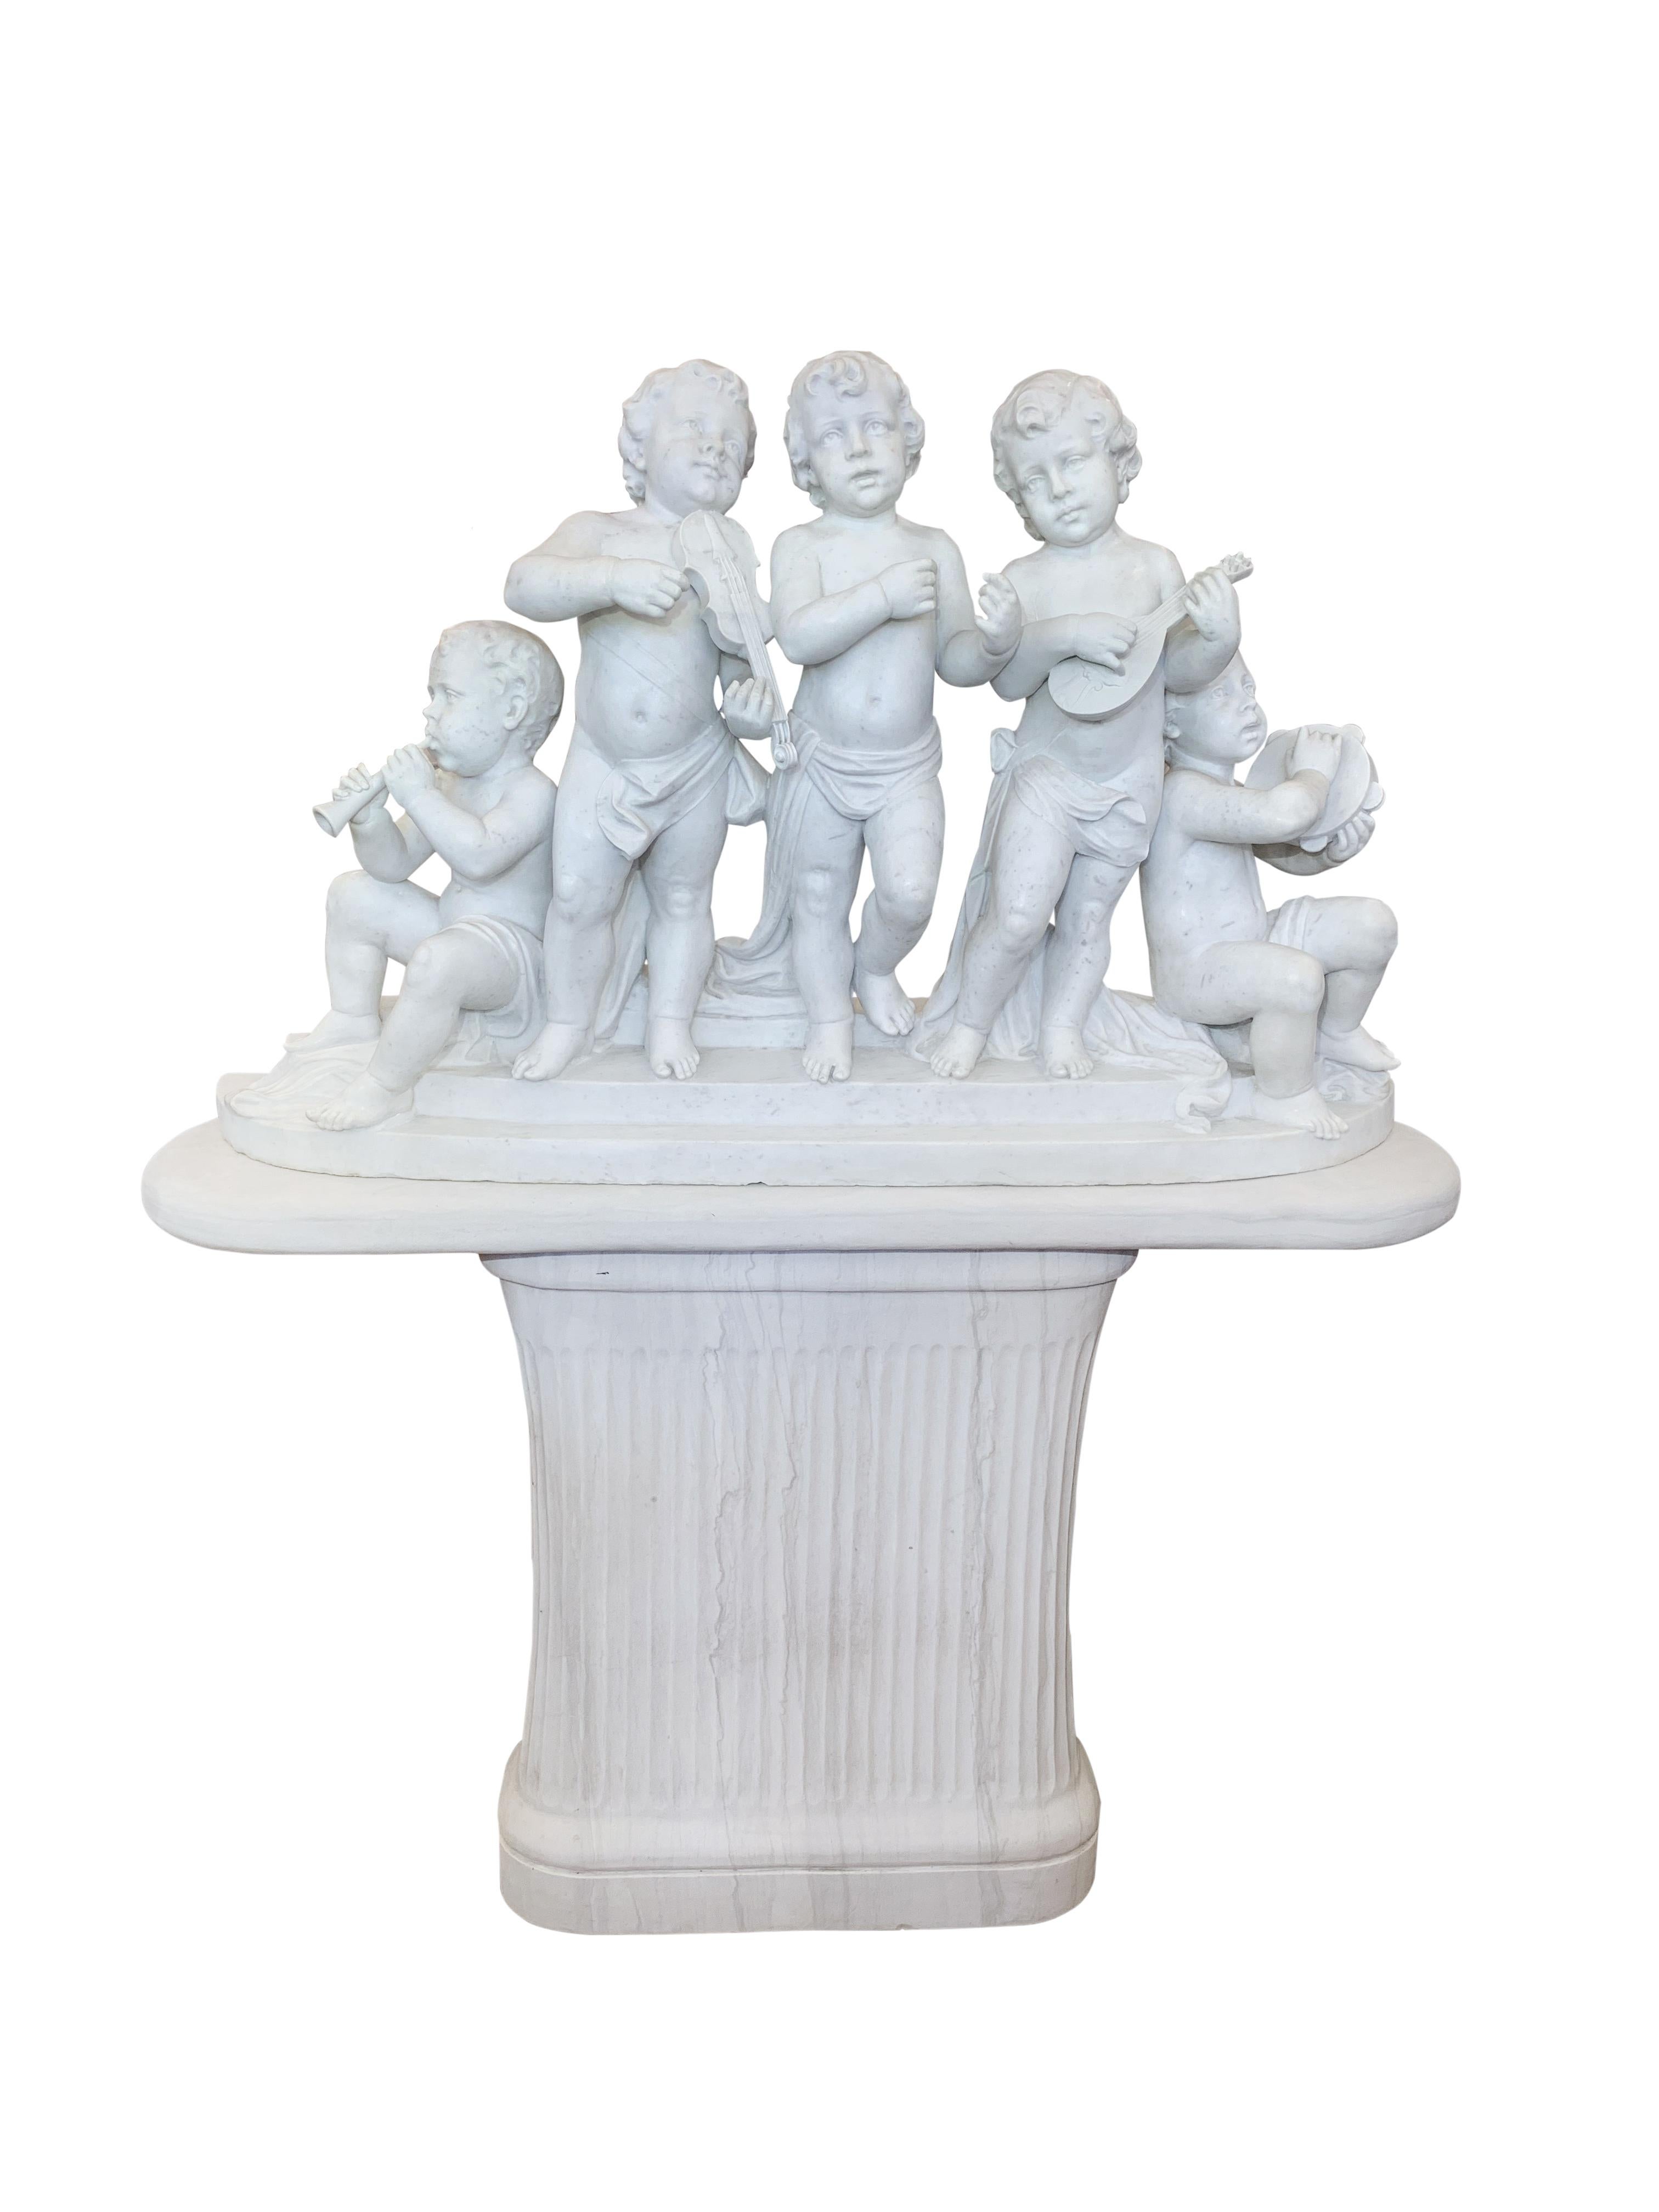 Hand-Carved Large 19th Century Italian Carved Marble Group Depicting Musicians  on stand